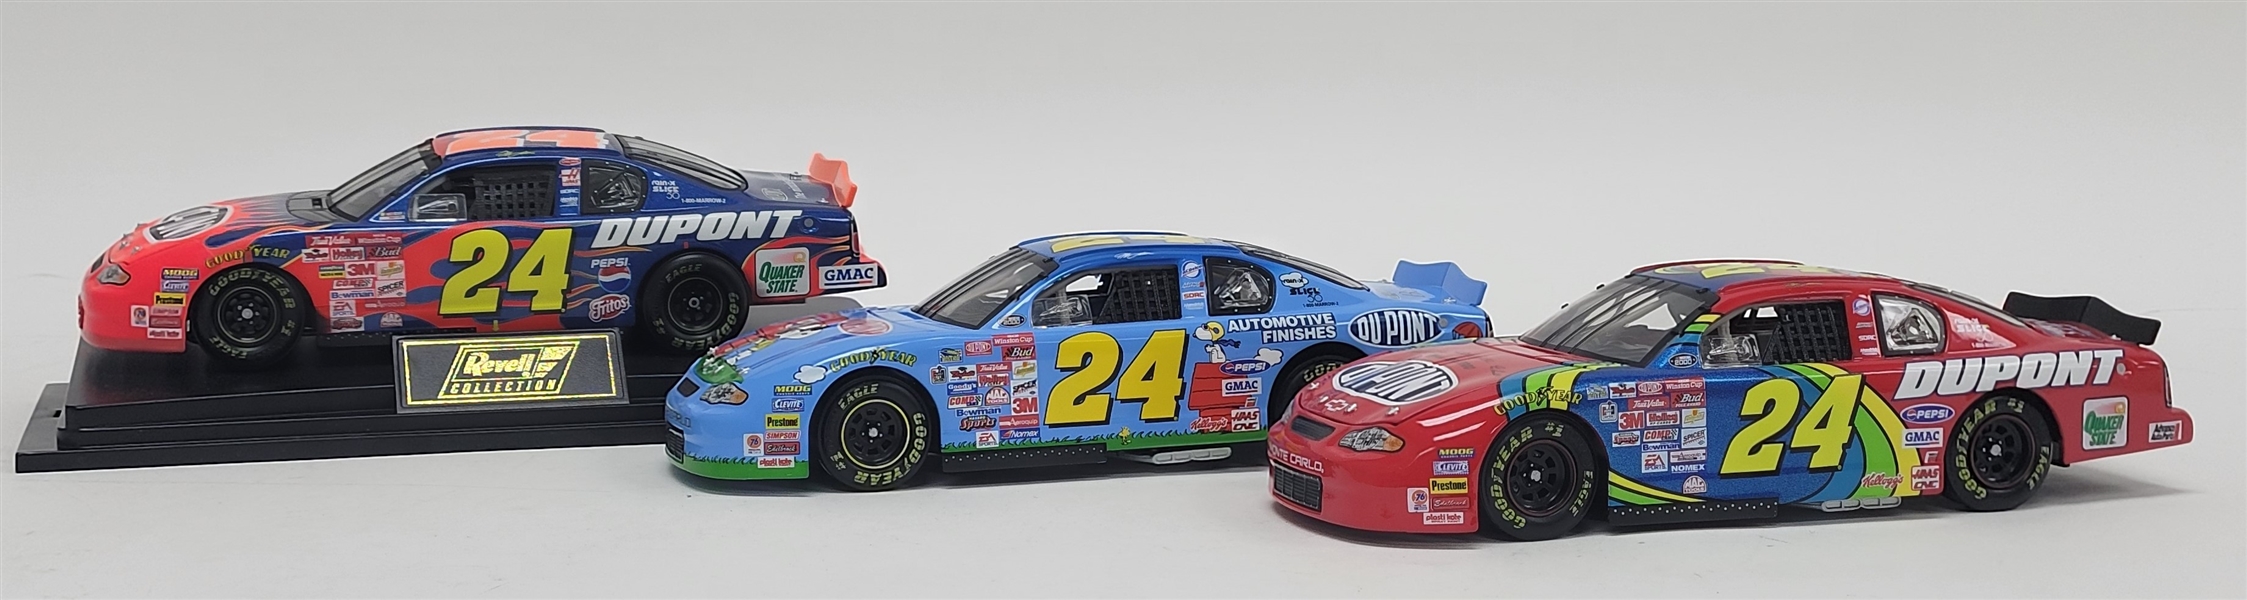 Lot of 3 Jeff Gordon Limited Edition Diecast Cars